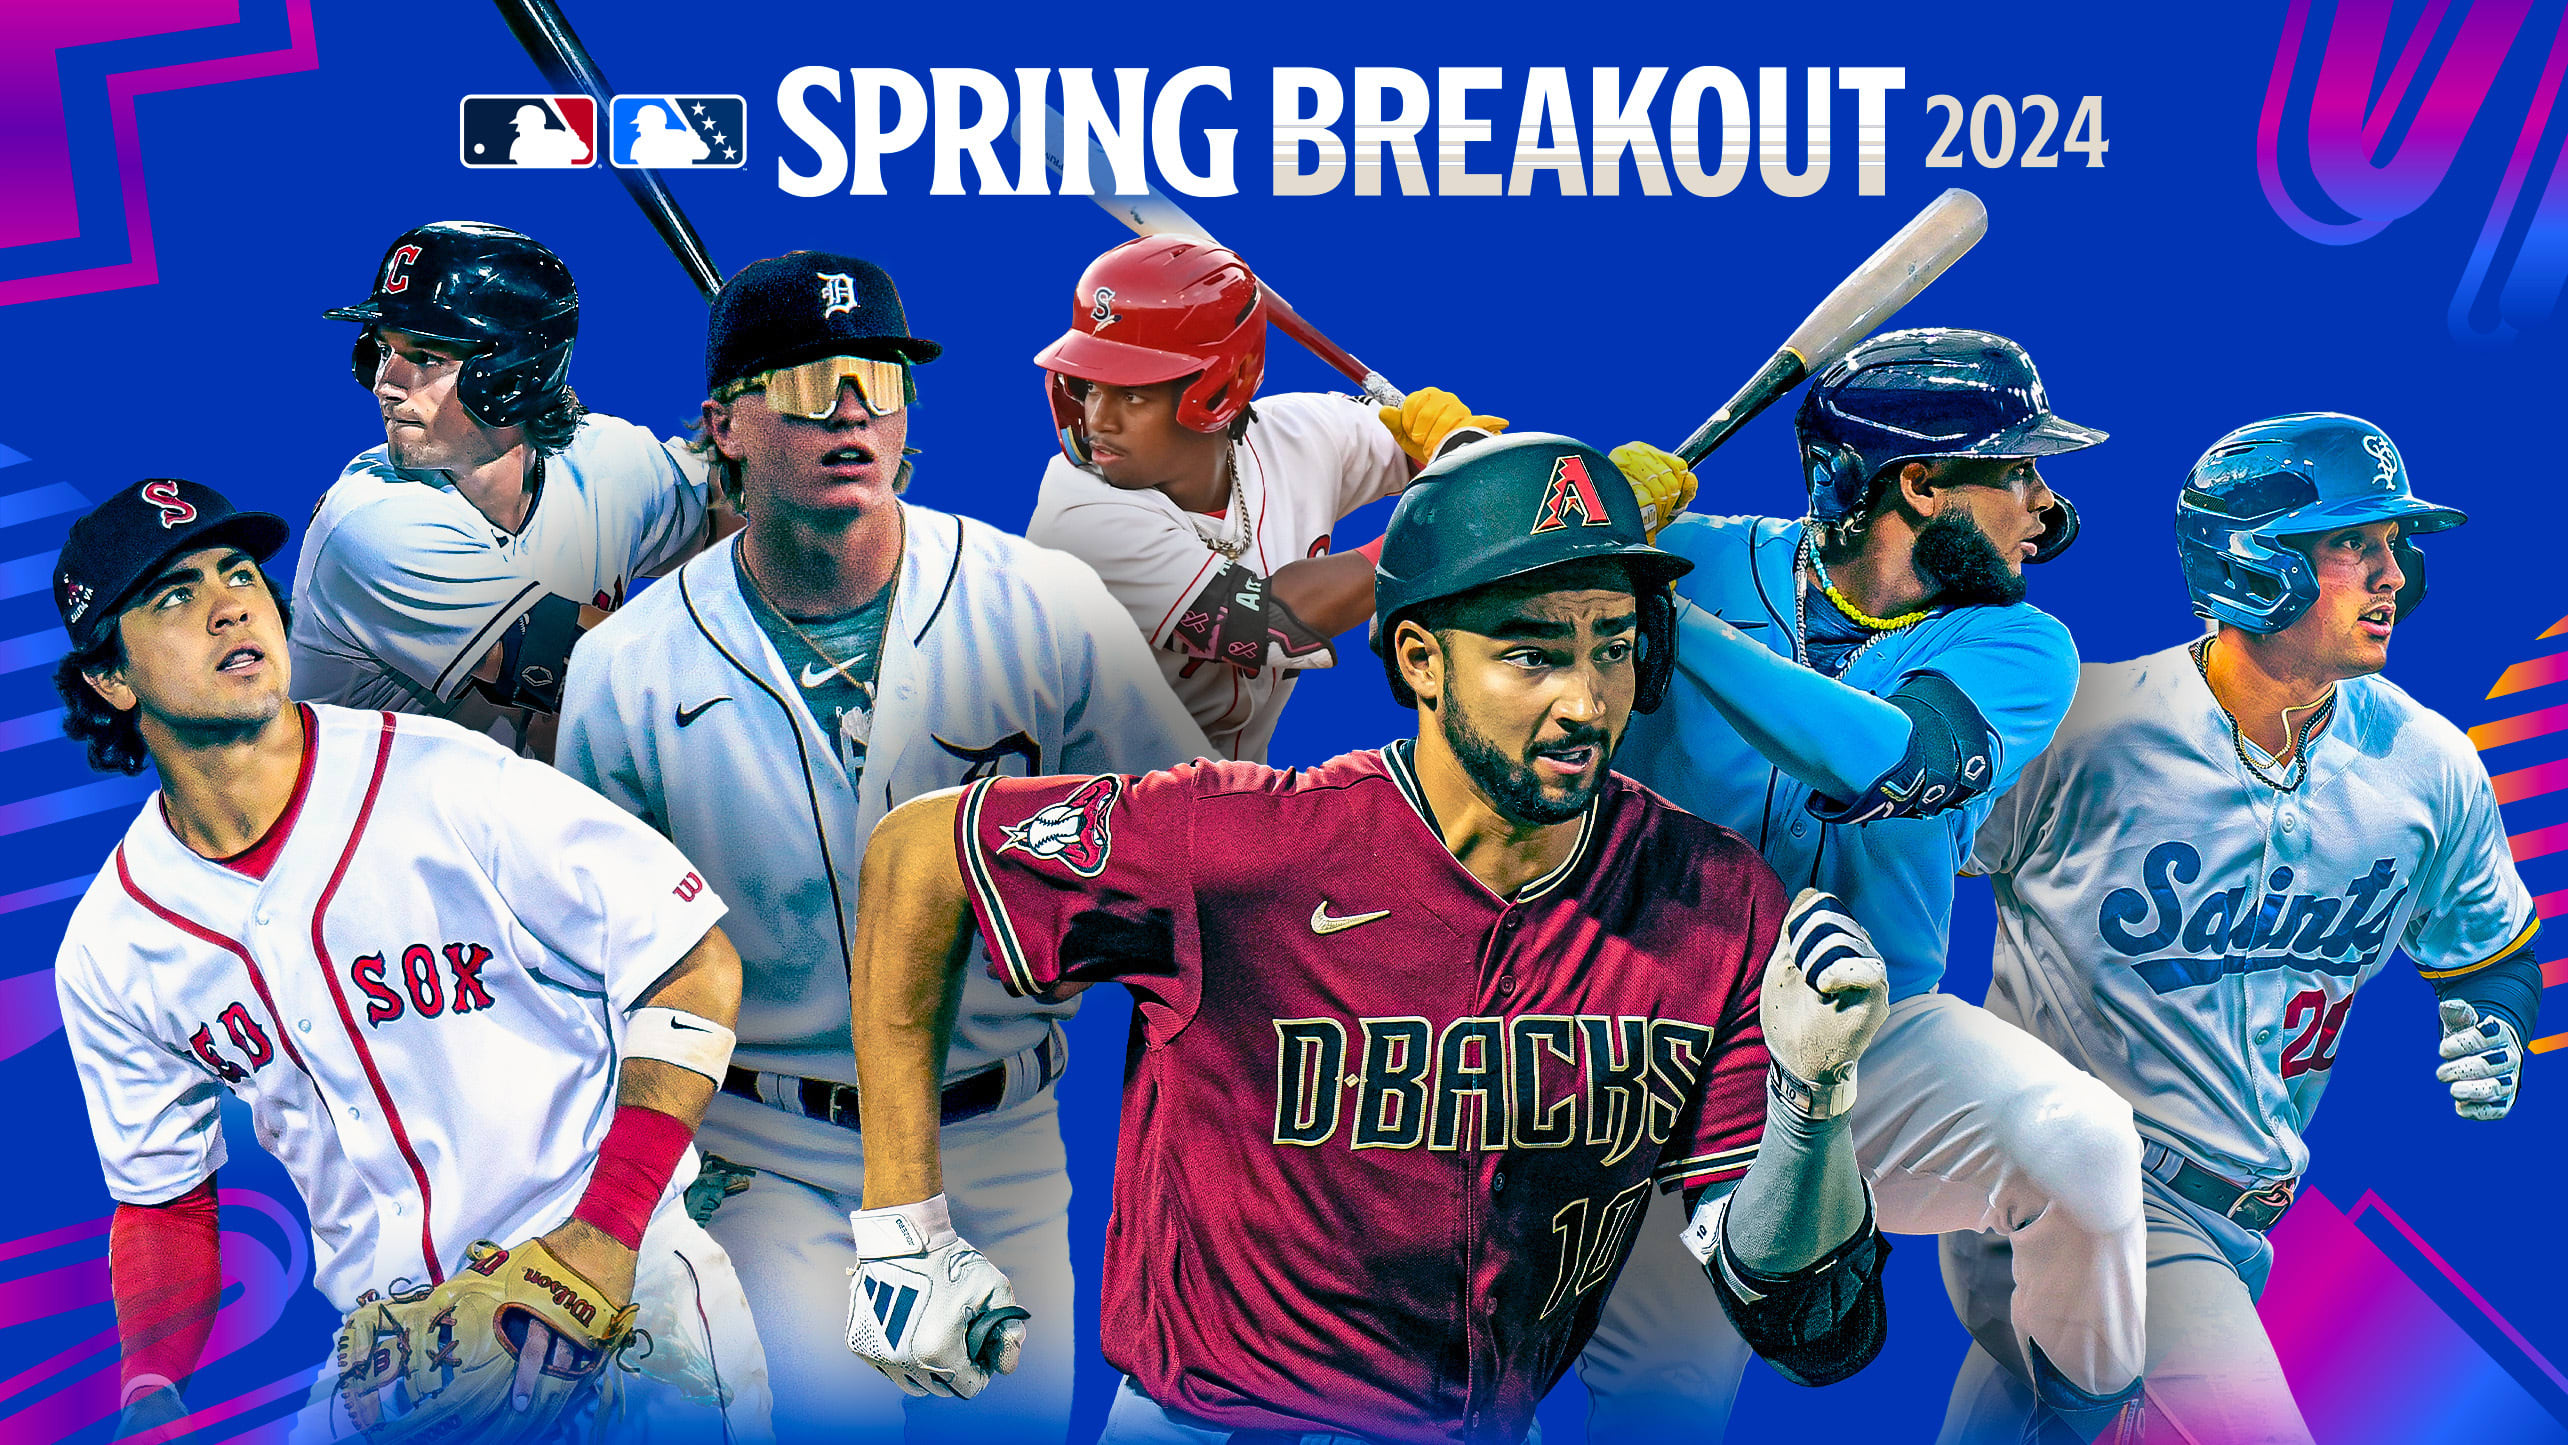 More than a dozen top prospects are set to take the field today in Spring Breakout